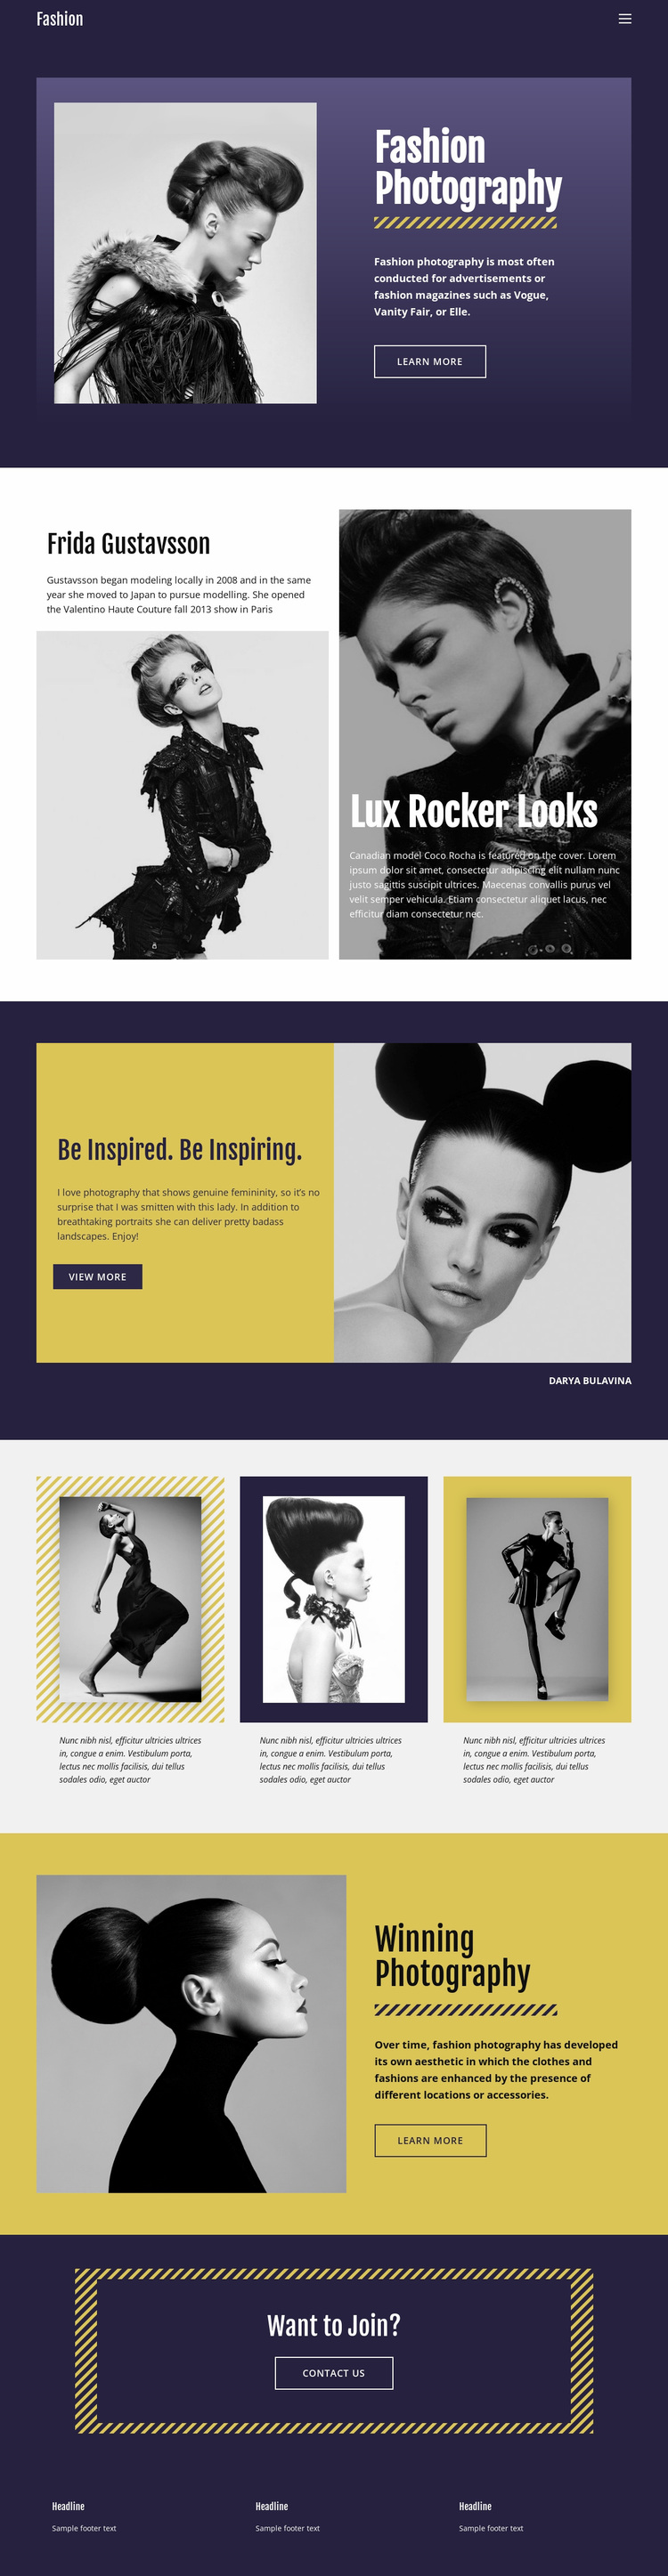 Fashion Photography Classic Style Website Design